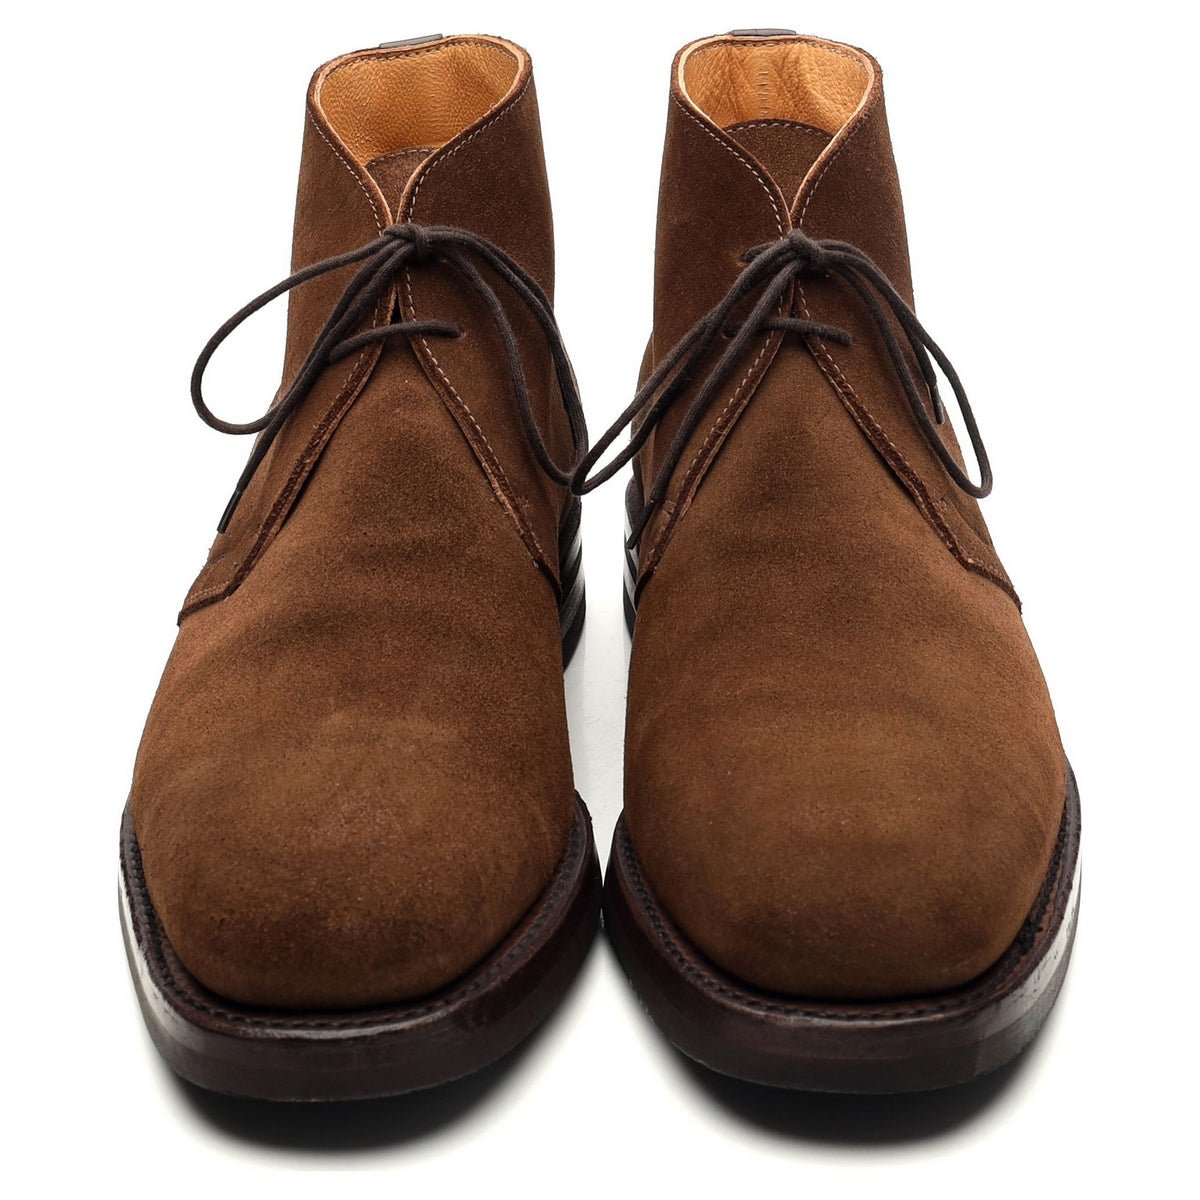 Brown Suede Chukka Boots UK 9